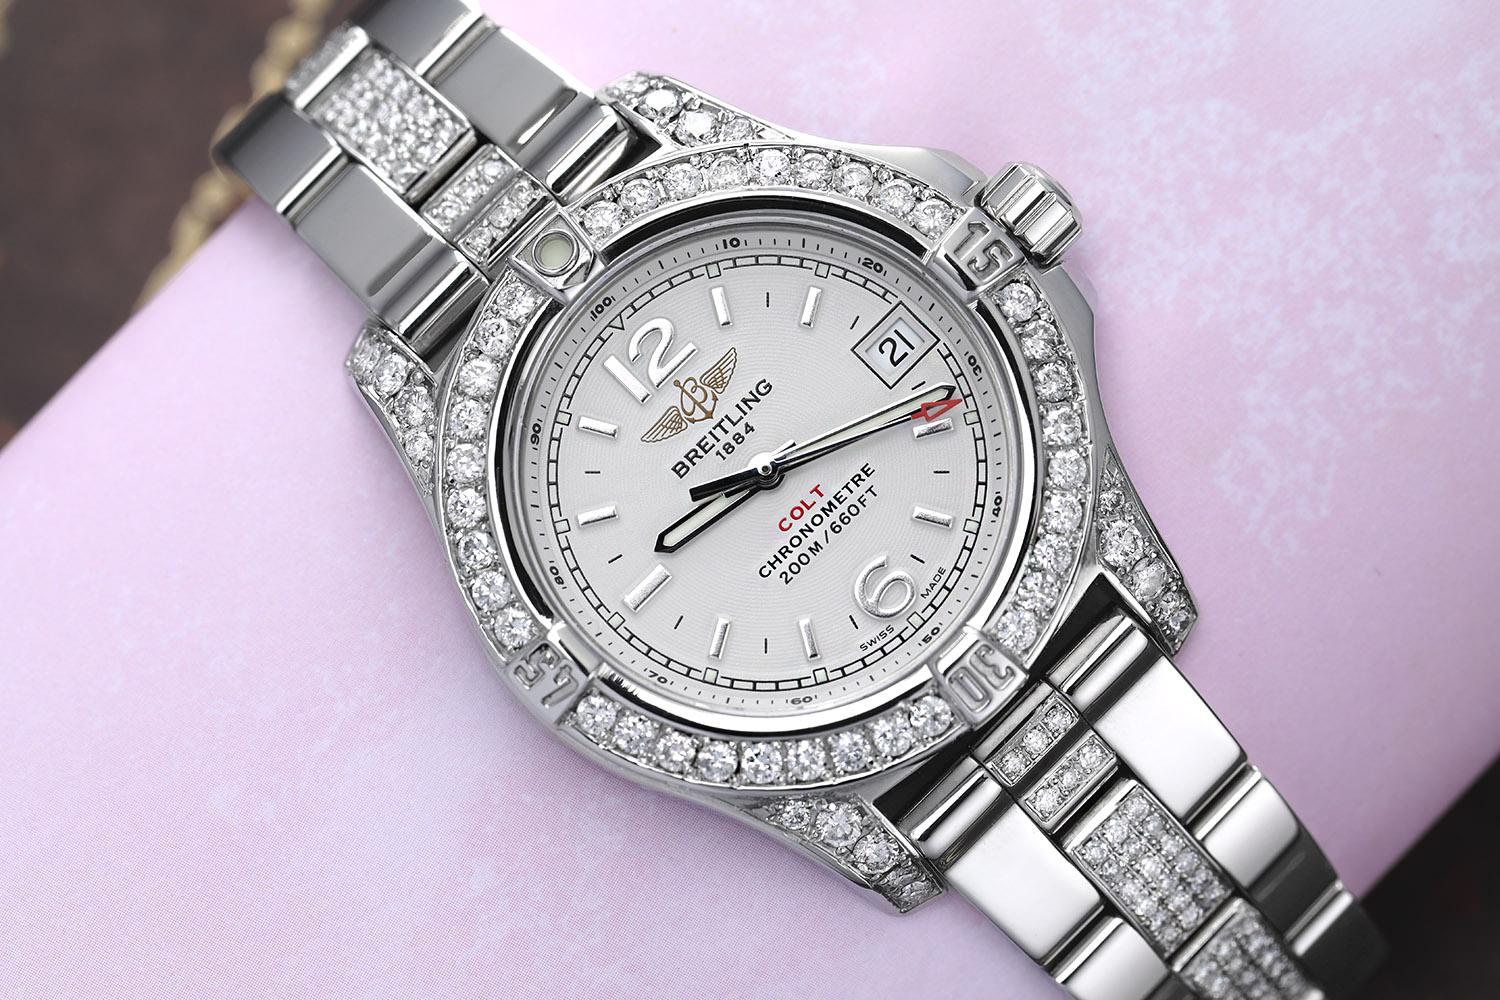 Breitling Colt 33 A77388 White Dial Stainless Steel Ladies Watch with Diamonds. Diamonds are 100% natural, they have been customized aftermarket. Watch comes with a Breitling Box, Papers and an appraisal certificate. Attached to the appraisal is our